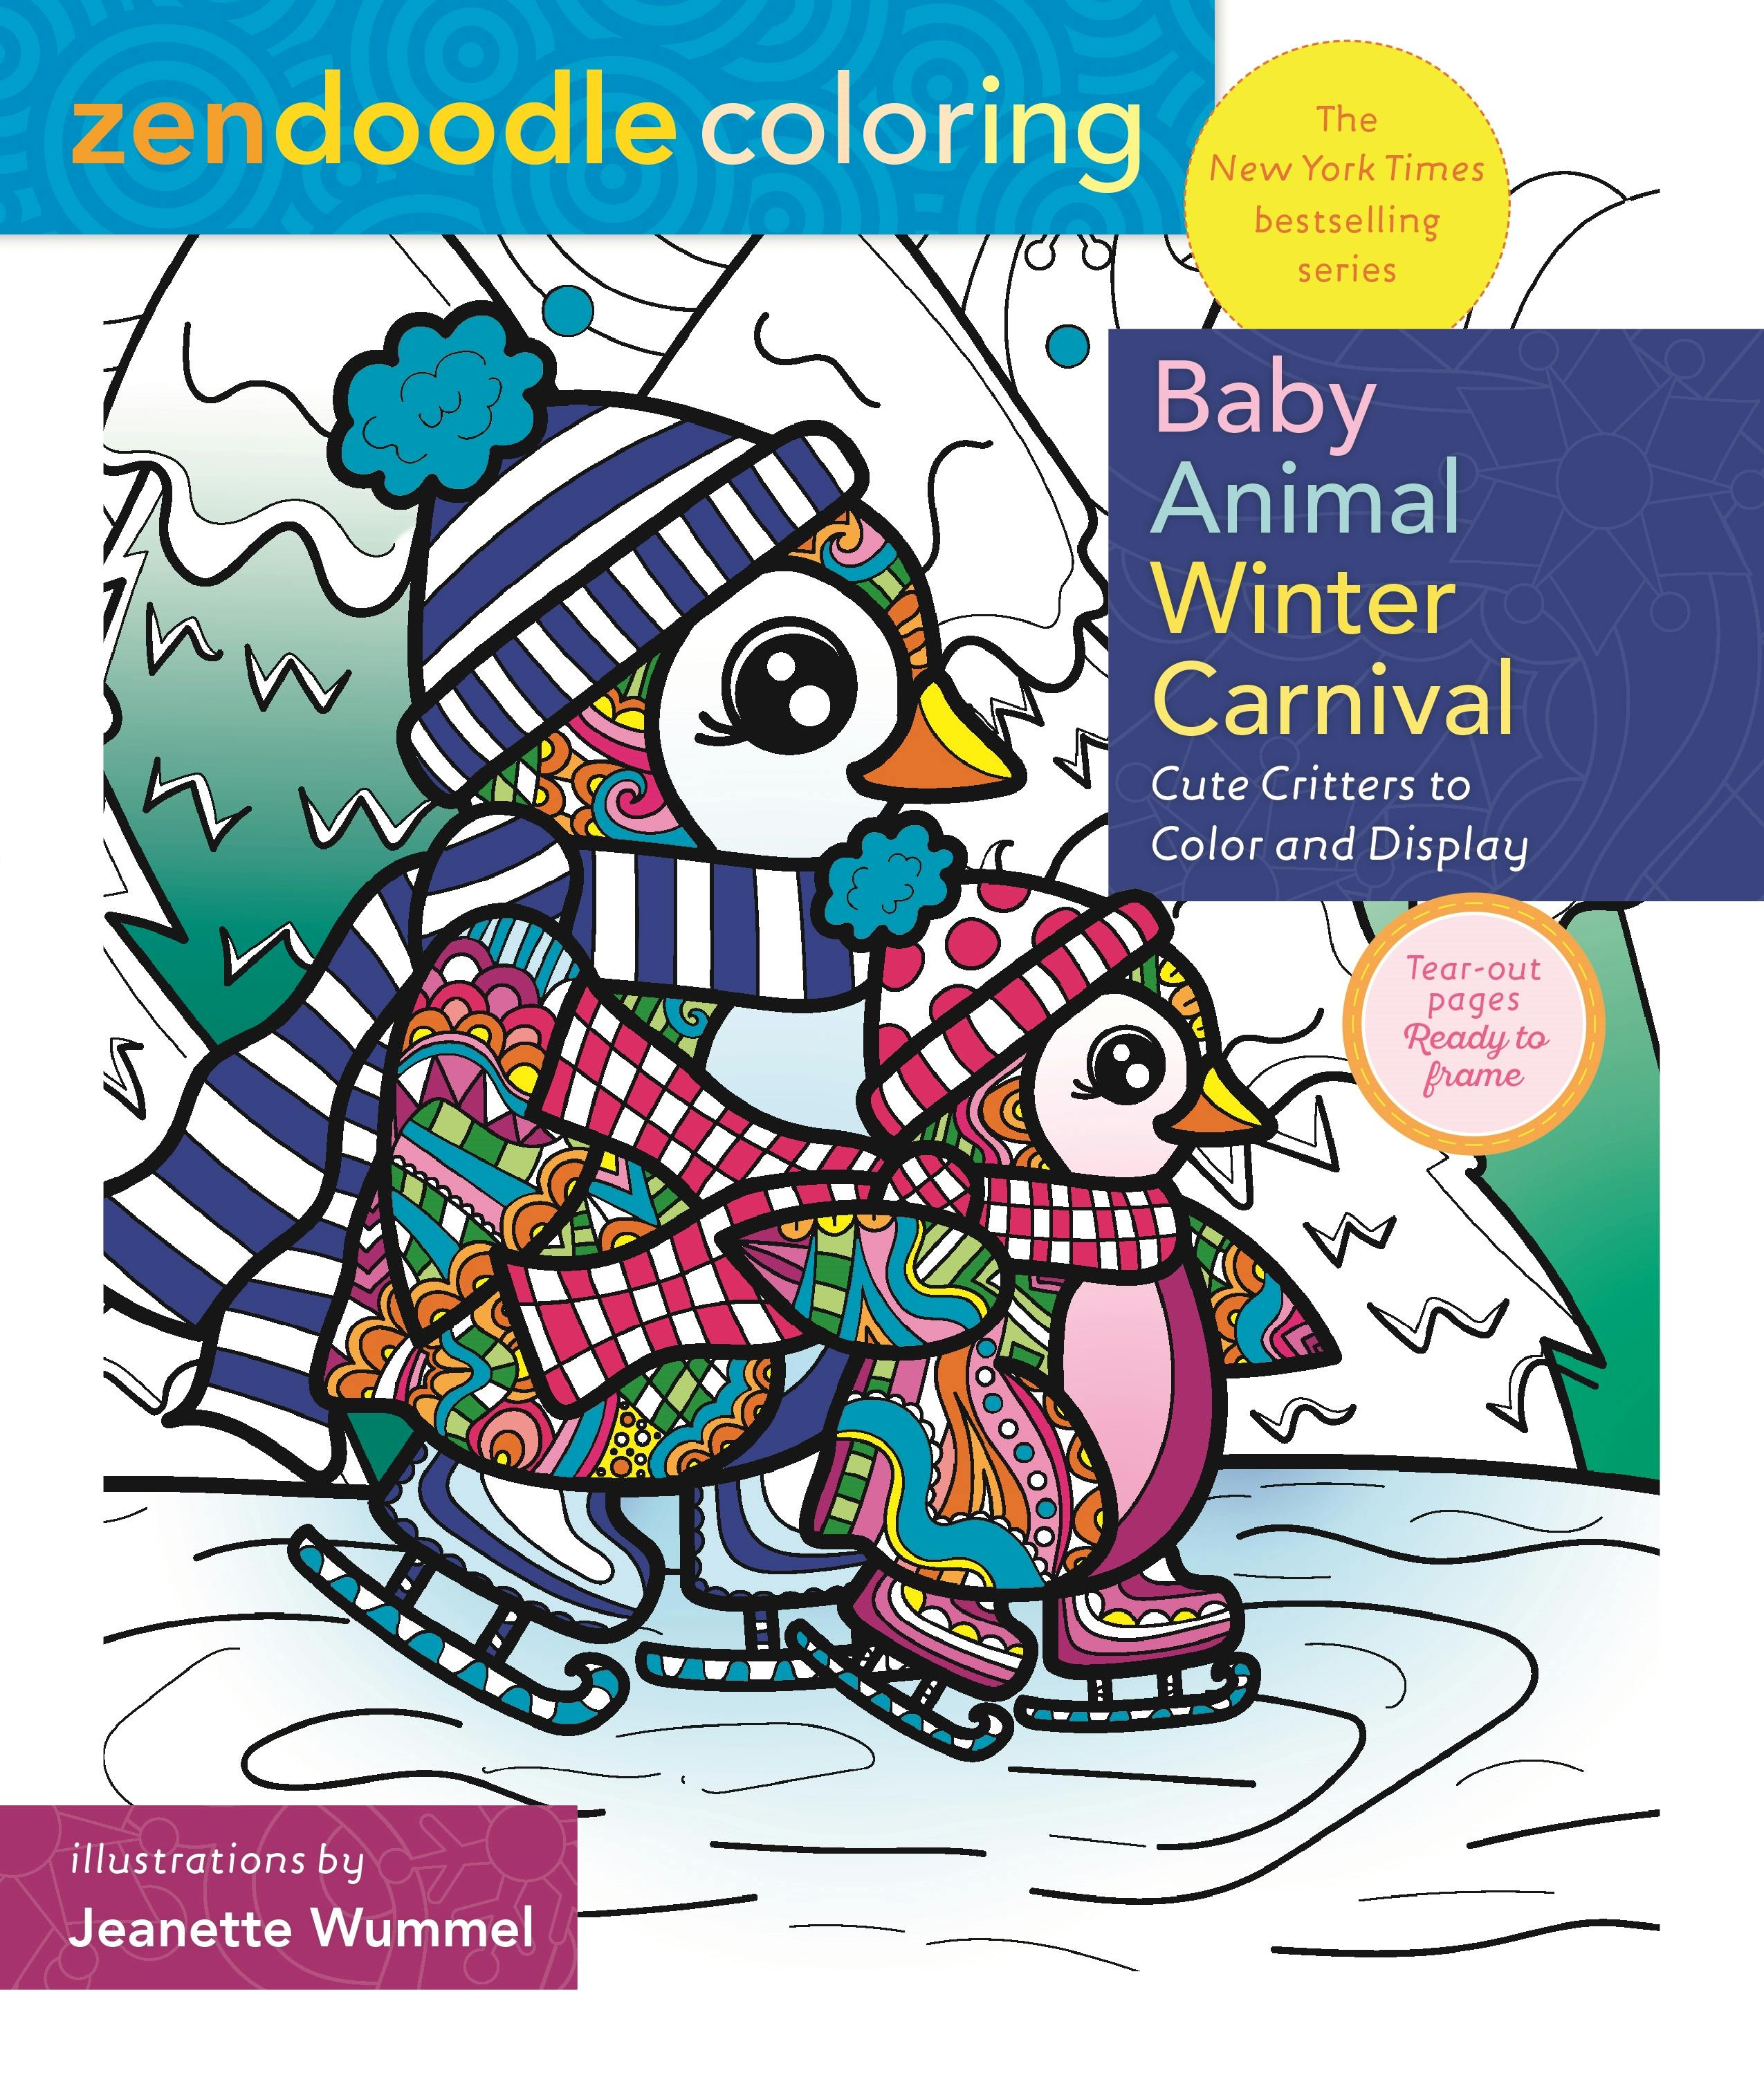 Zendoodle Coloring: Baby Animal Winter Carnival